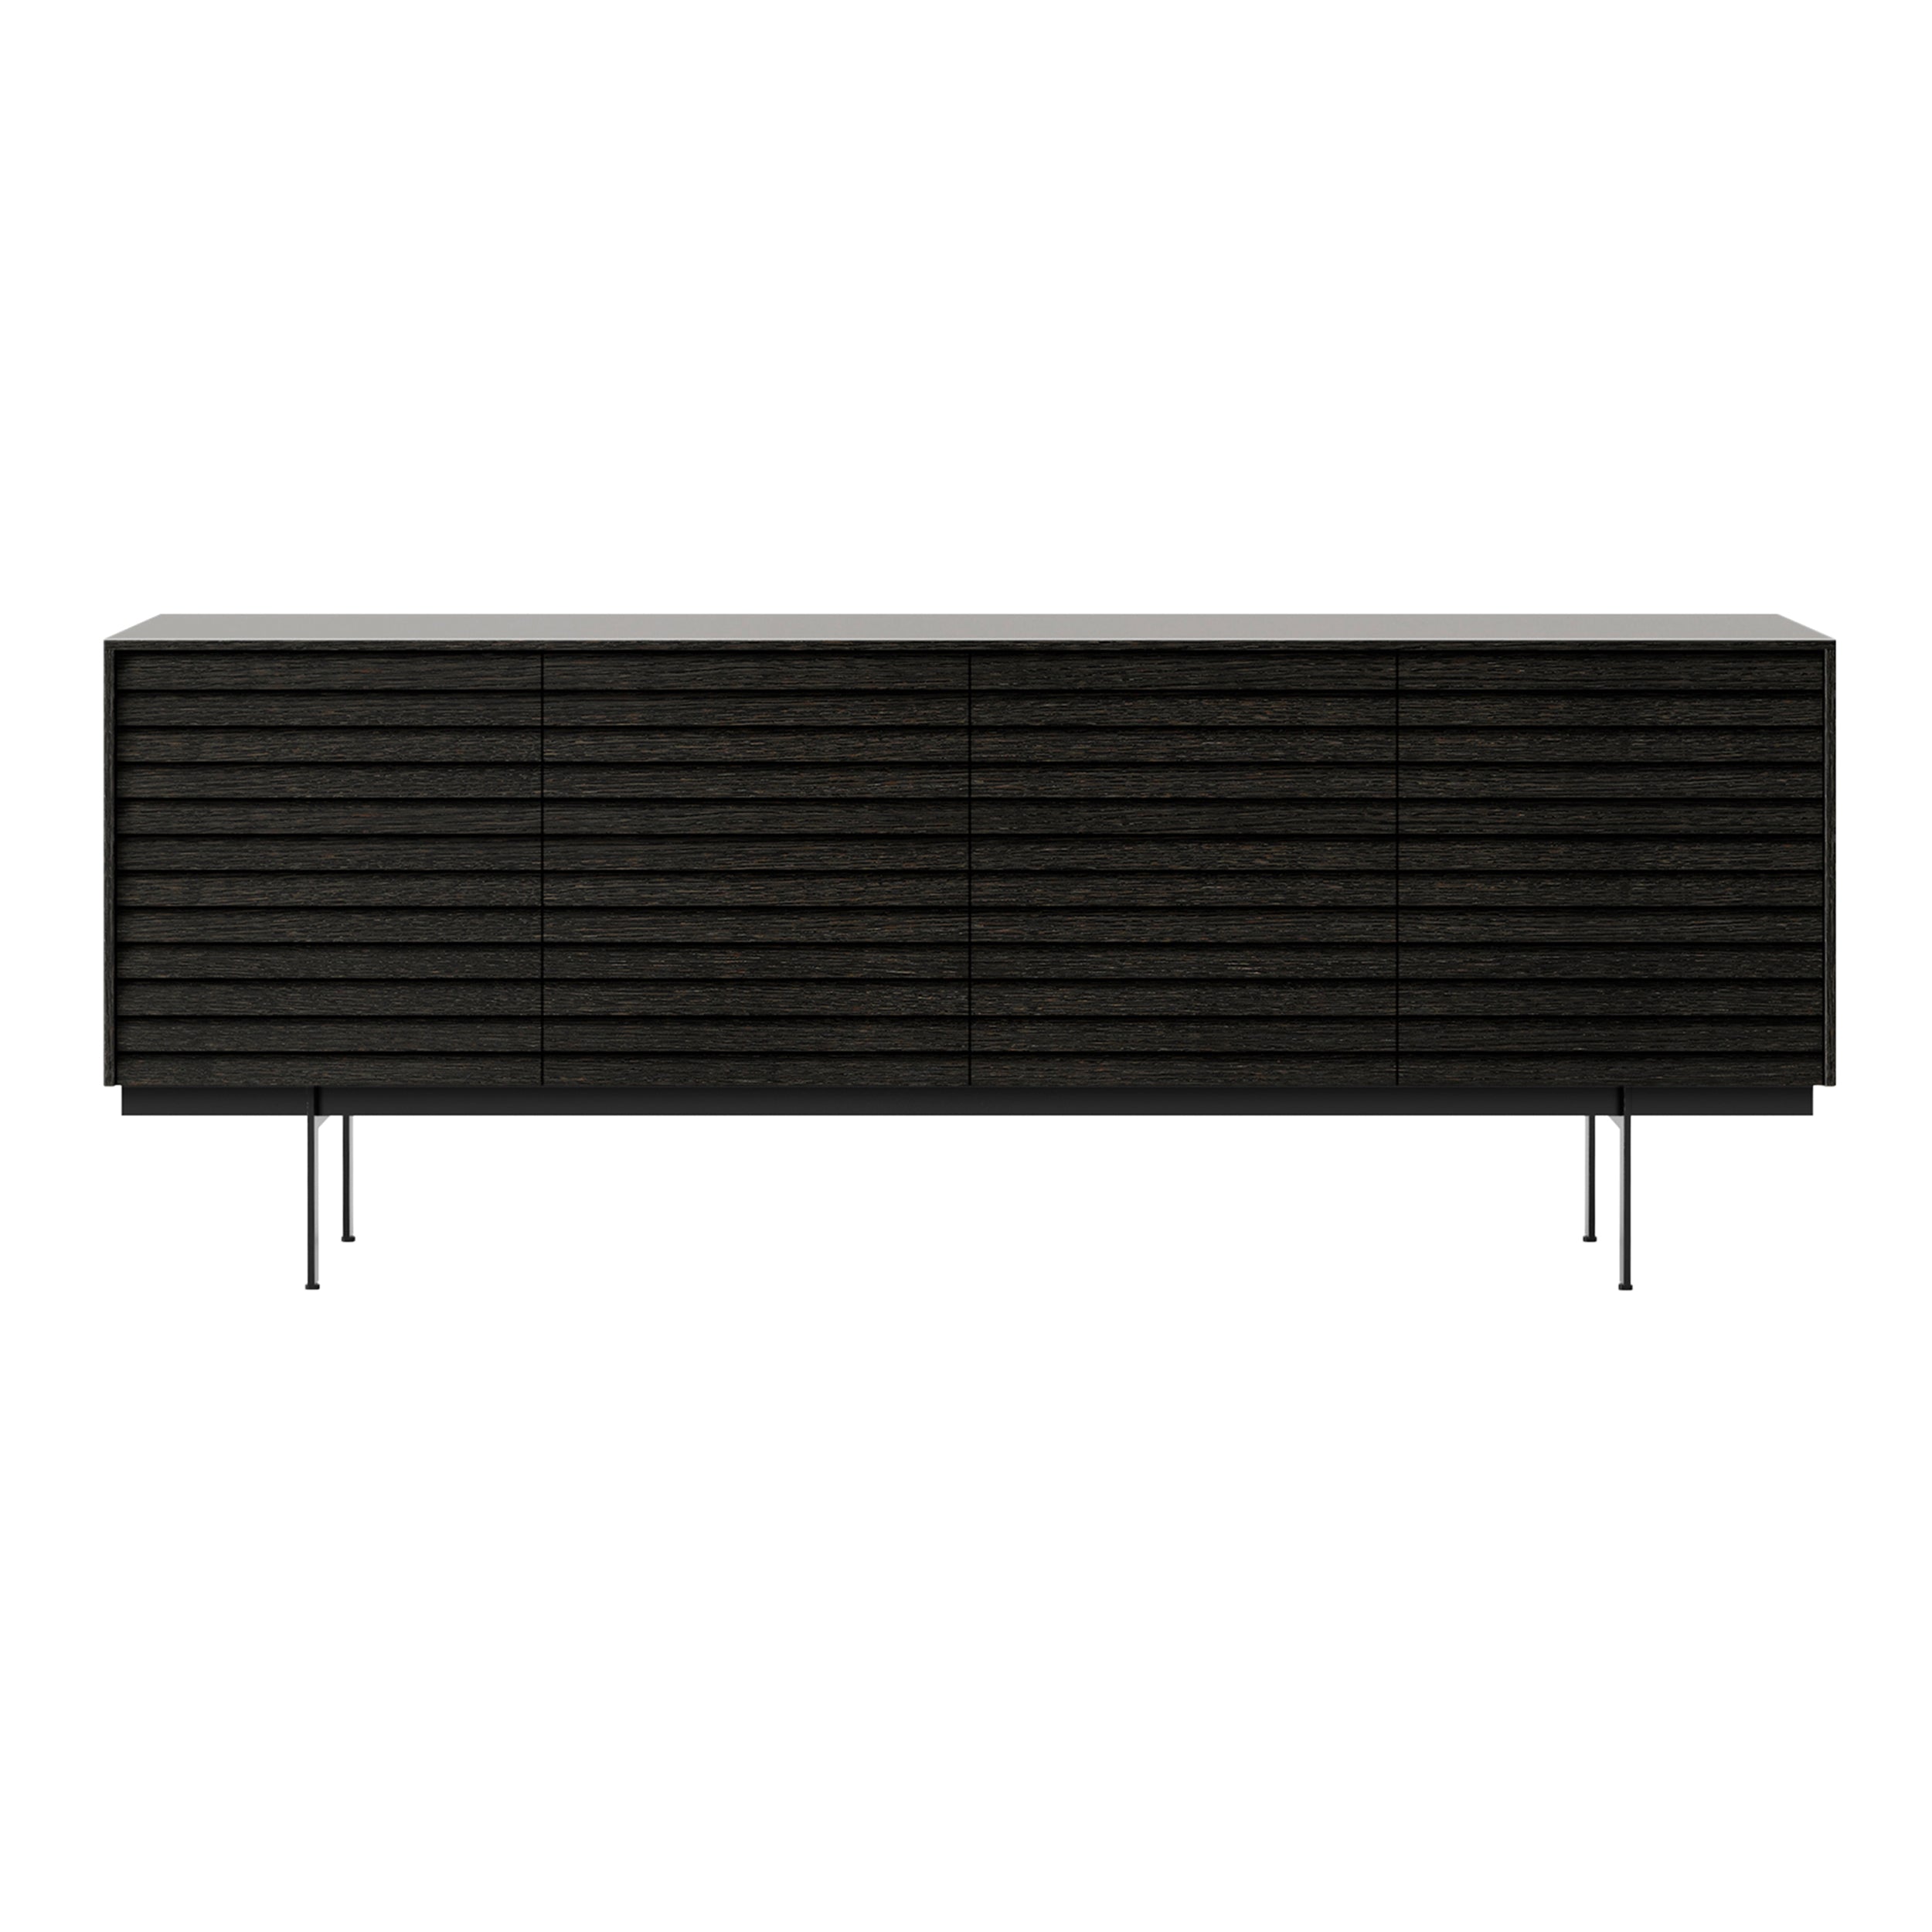 Sussex 12 Sideboard with Drawers: SSX431 + Dark Grey Stained Oak + Black